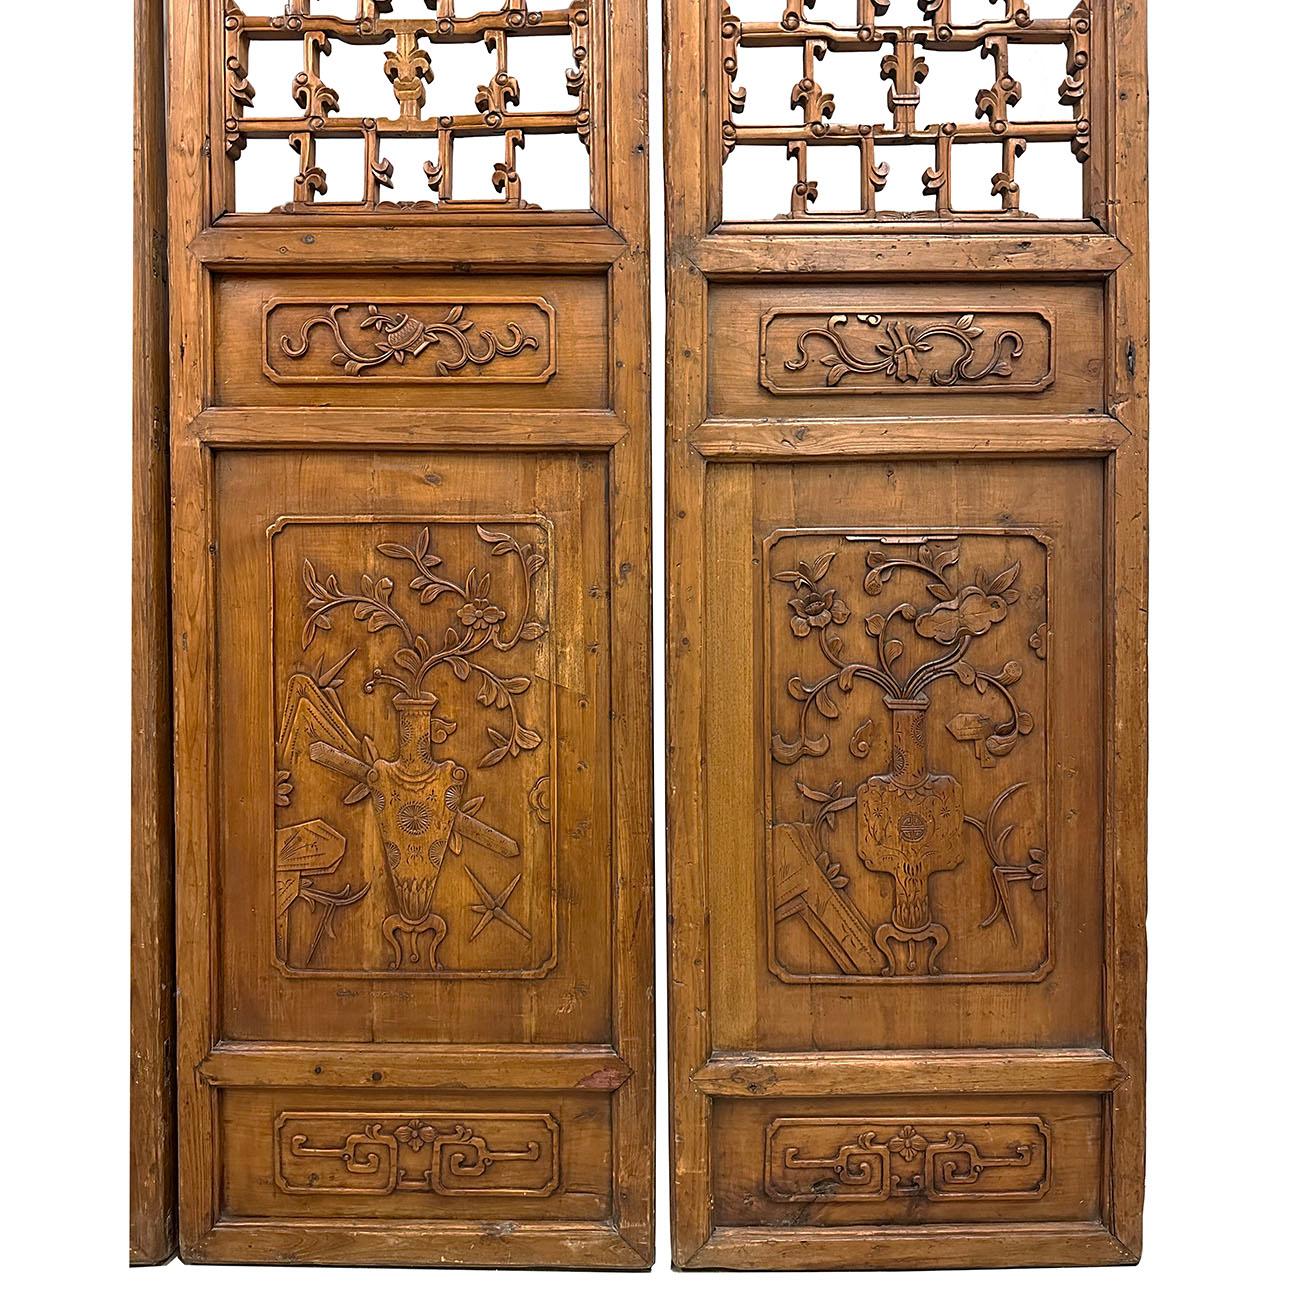 Late 19th Century Antique Chinese Hand Carved 6 Panels Wooden Screen/Room Divide 4